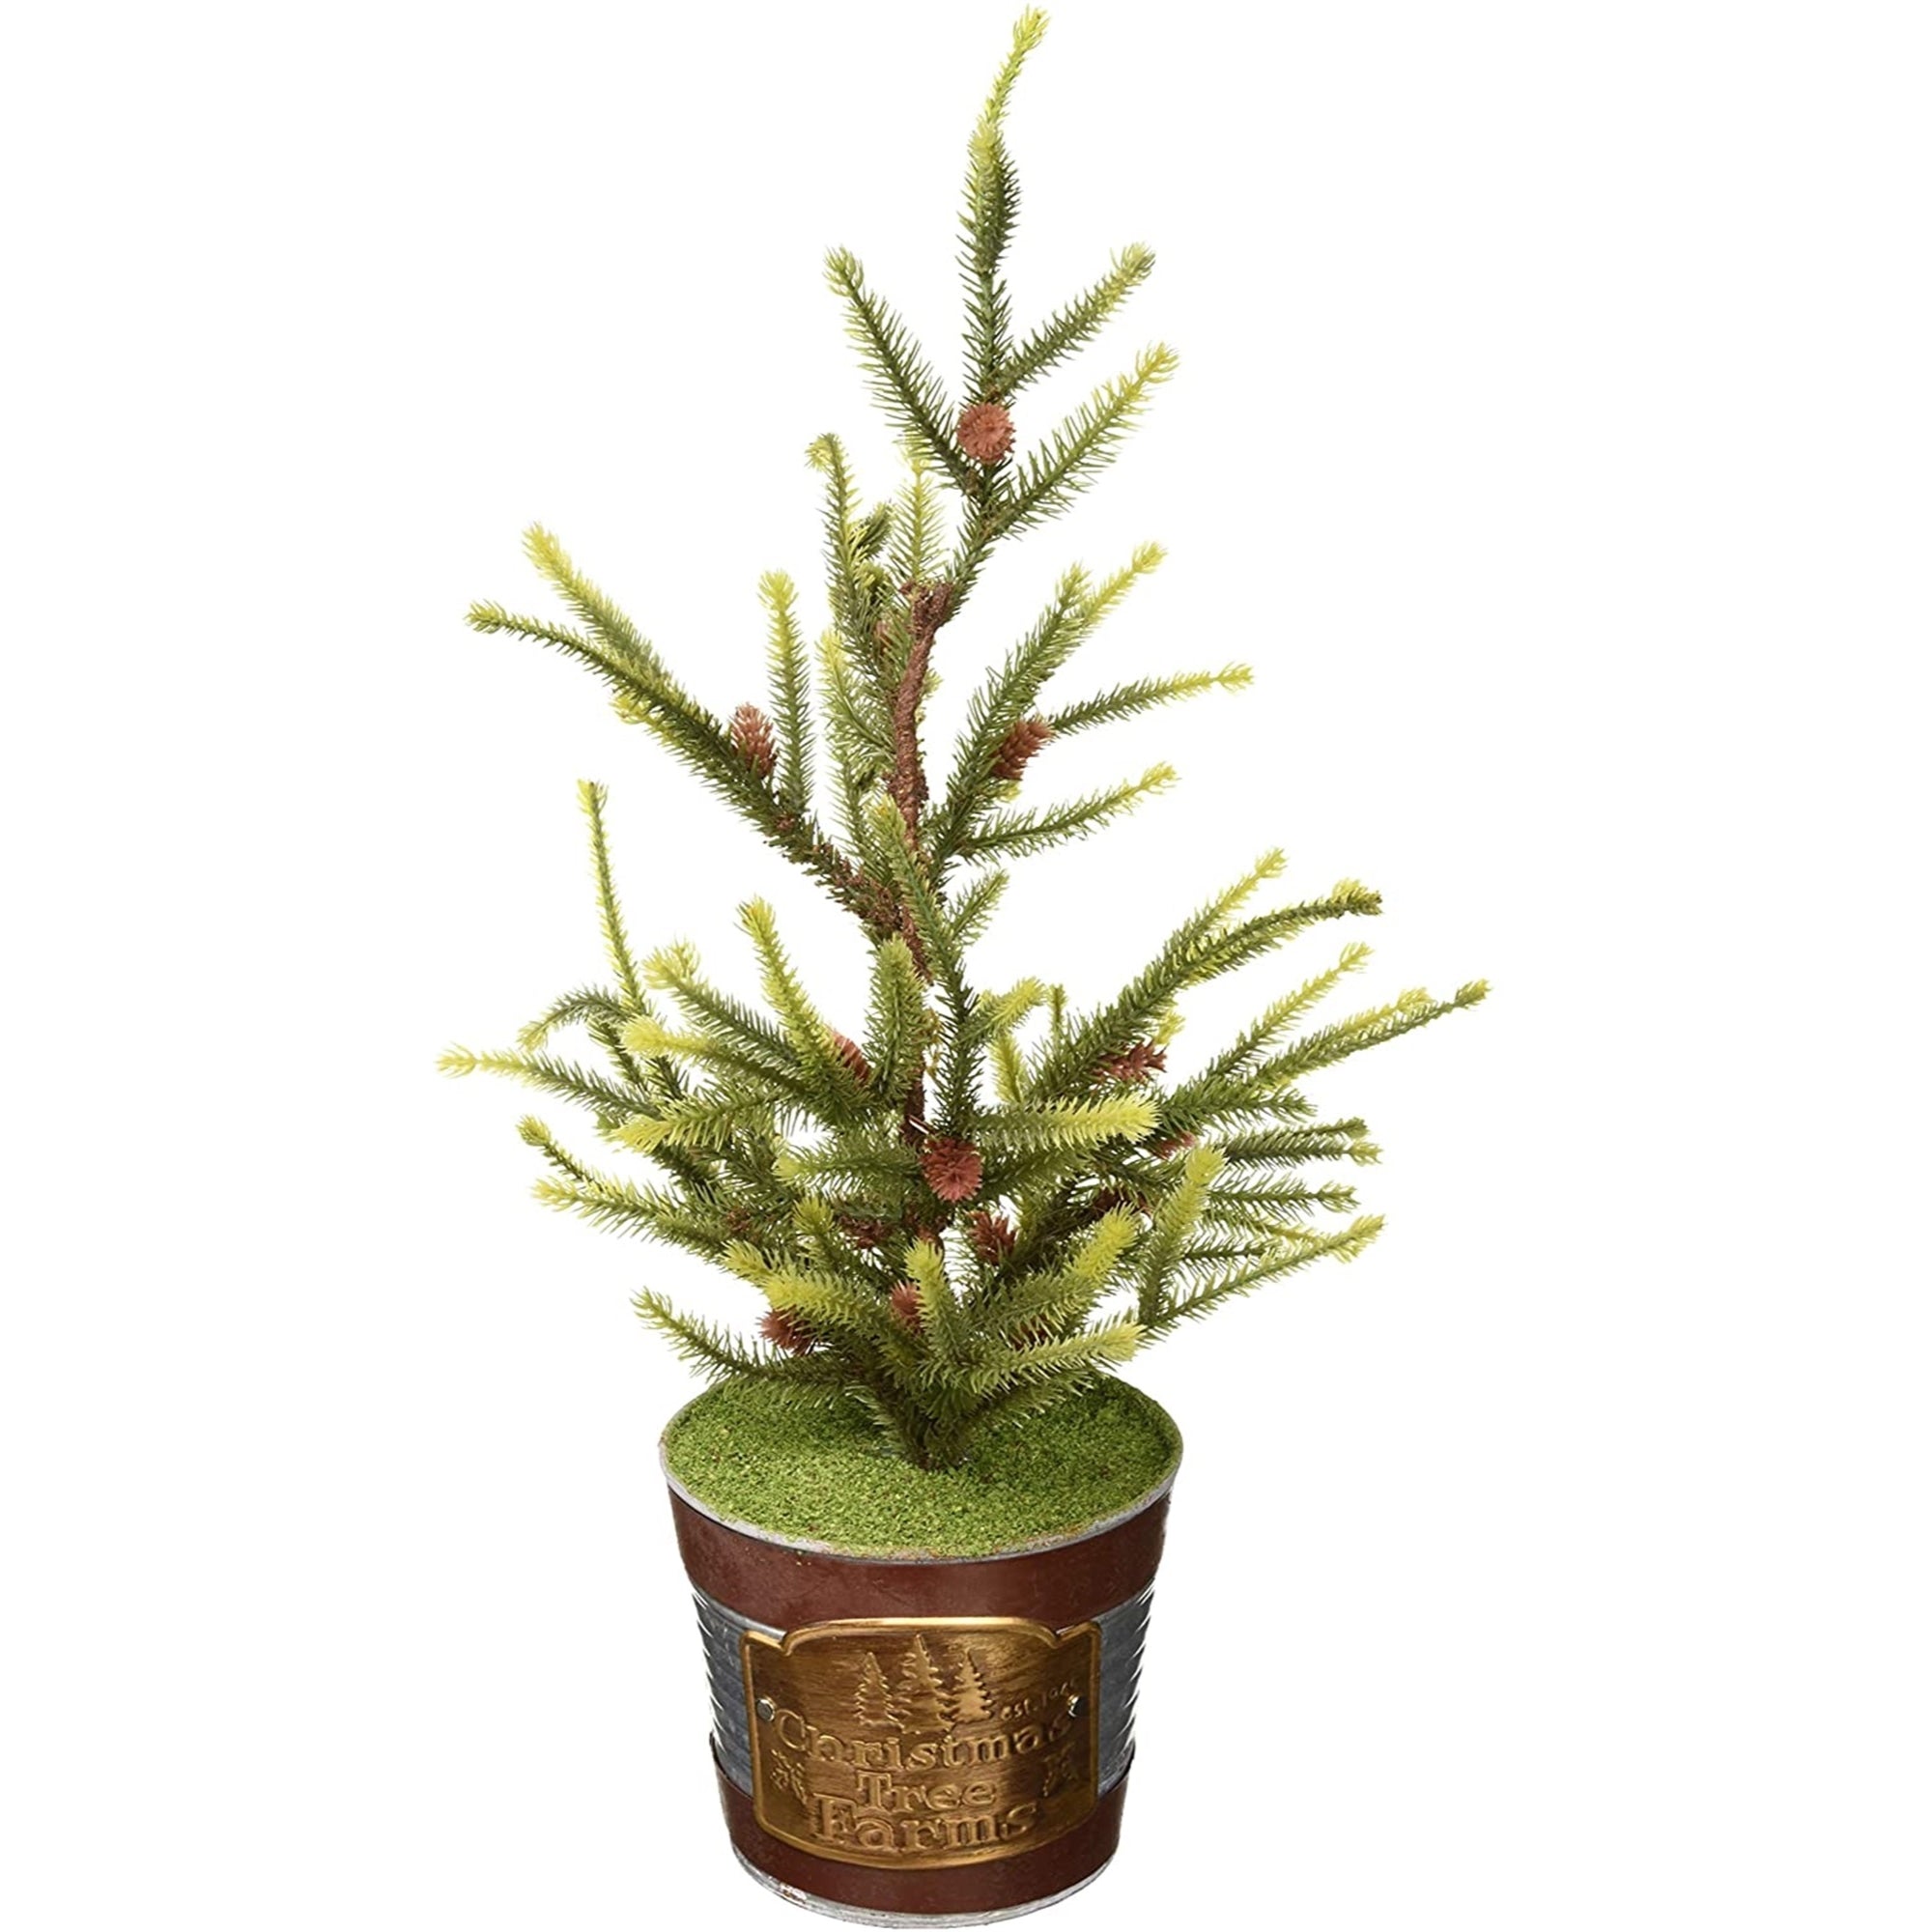 Gerson Christmas Tree Farms Container with Artificial Tree, 18"